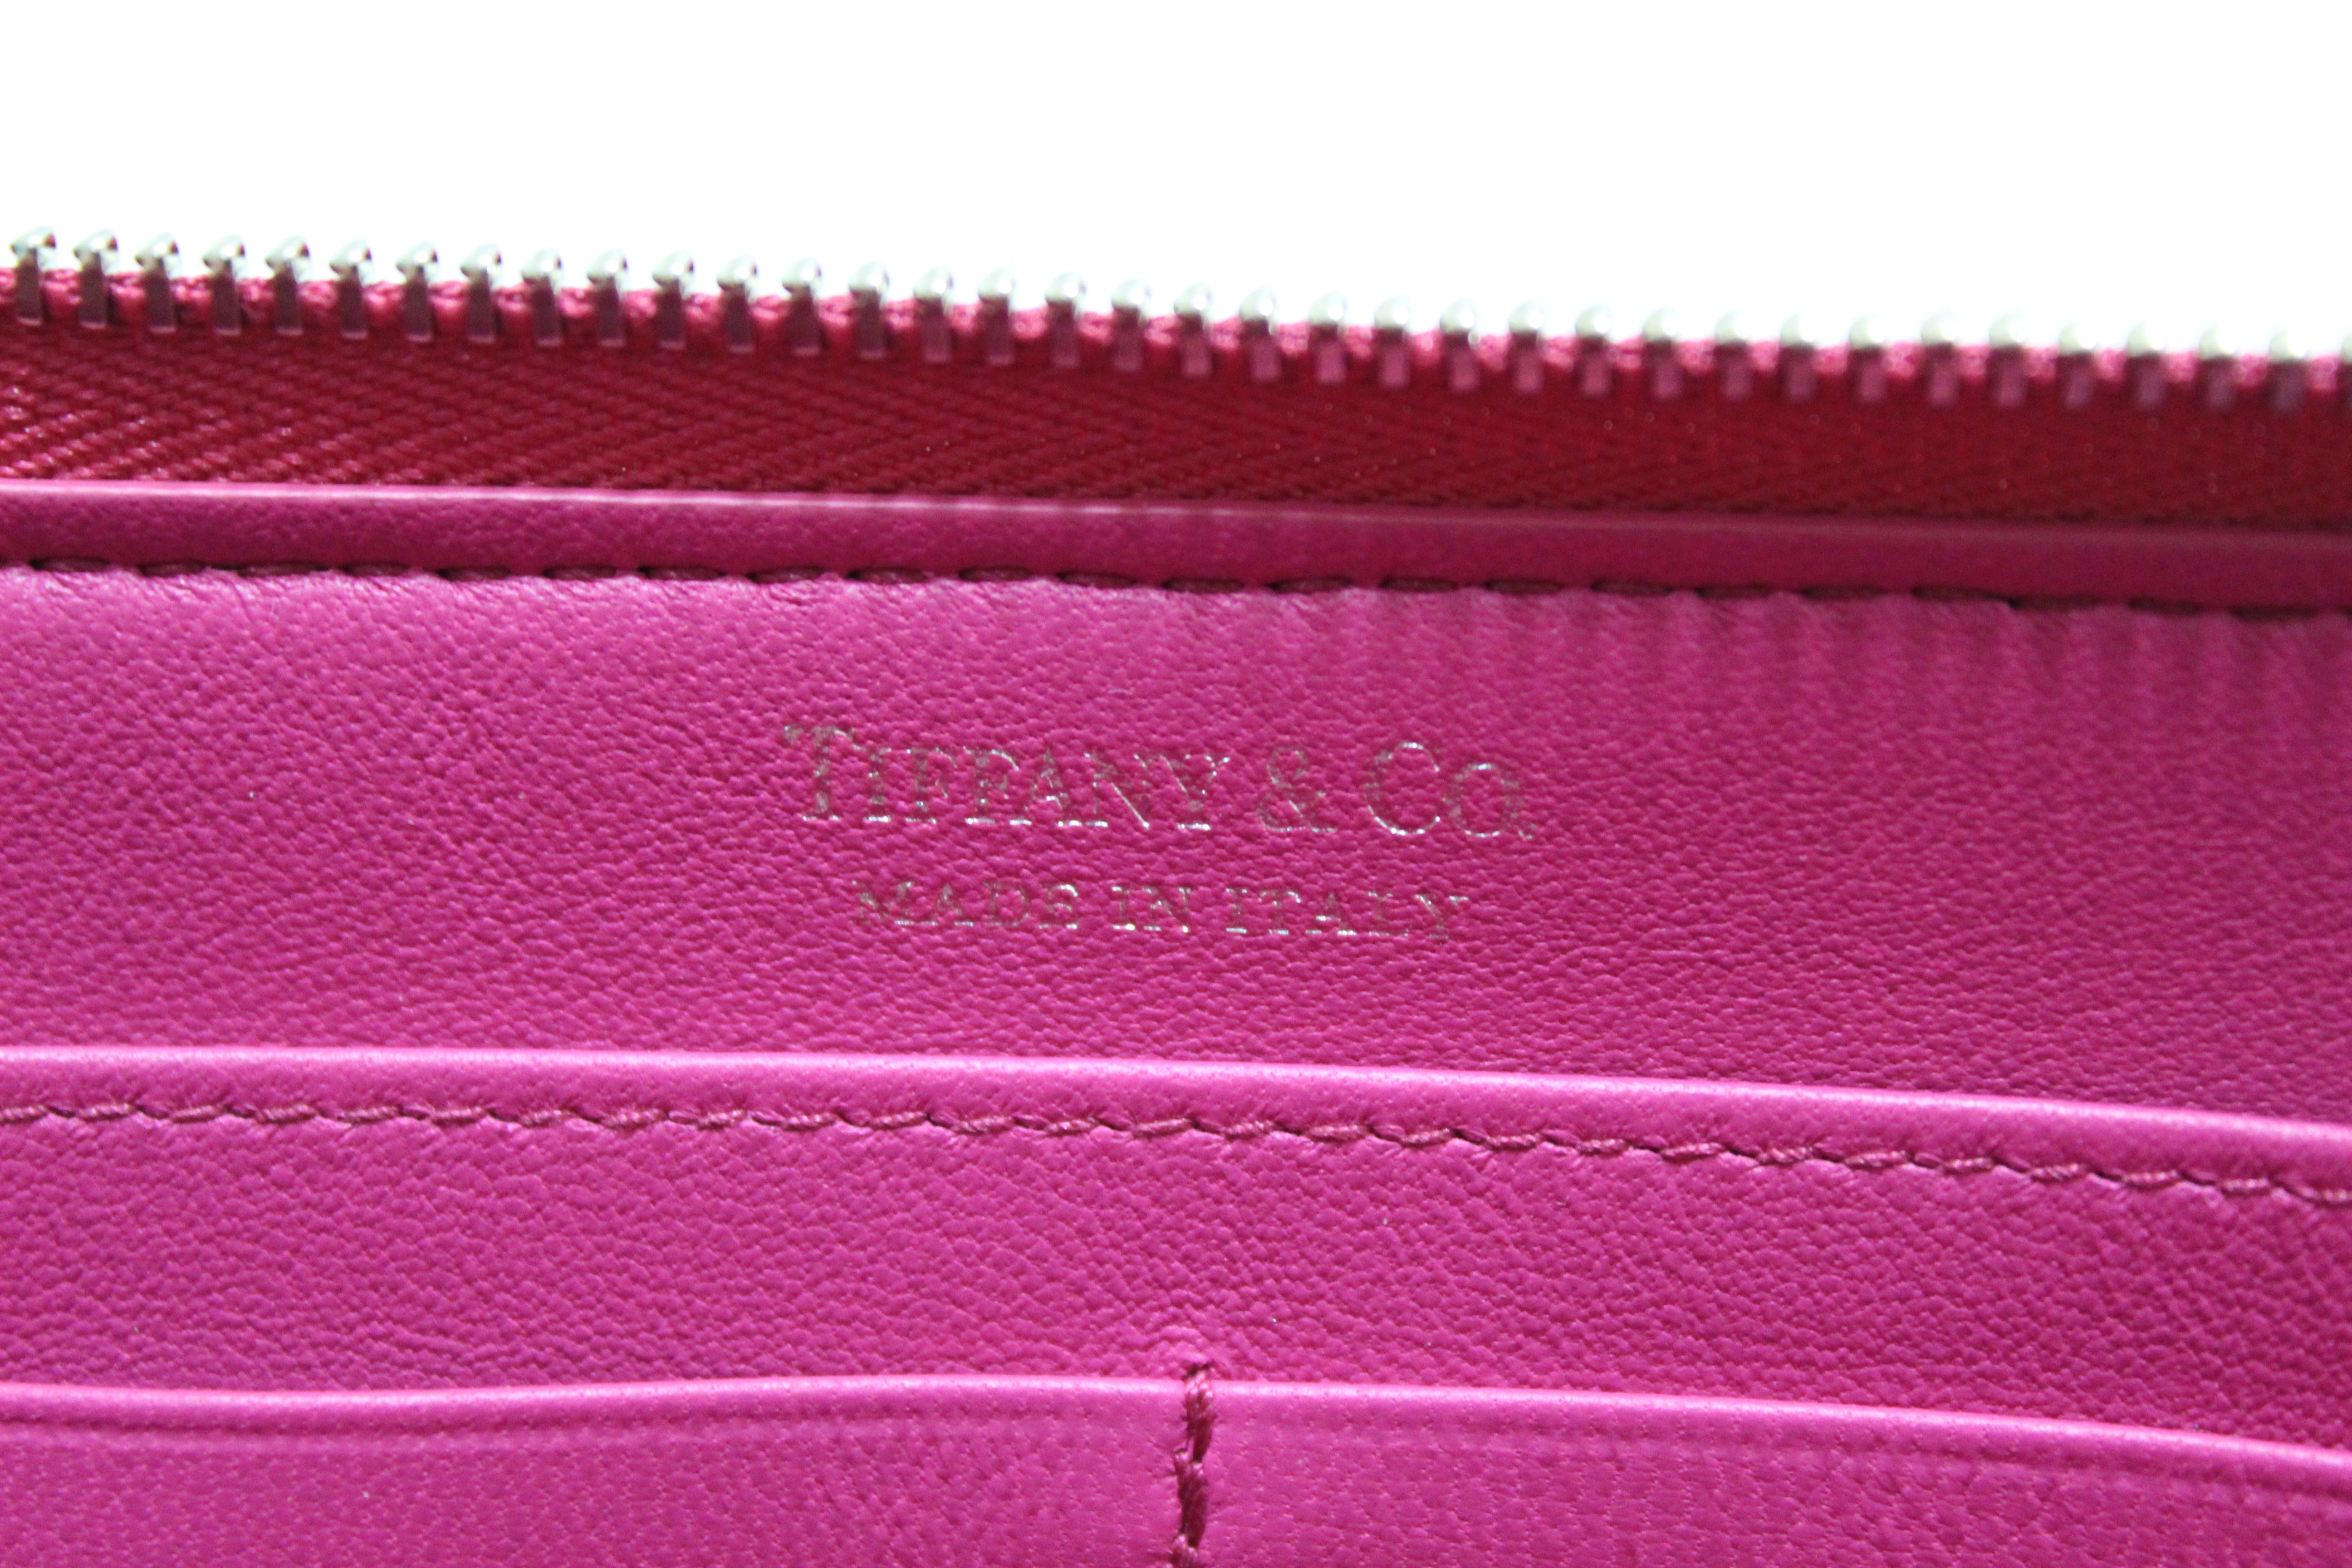 Authentic NEW Tiffany & Co. Magenta Pink Calfskin Leather Organizer Pouch